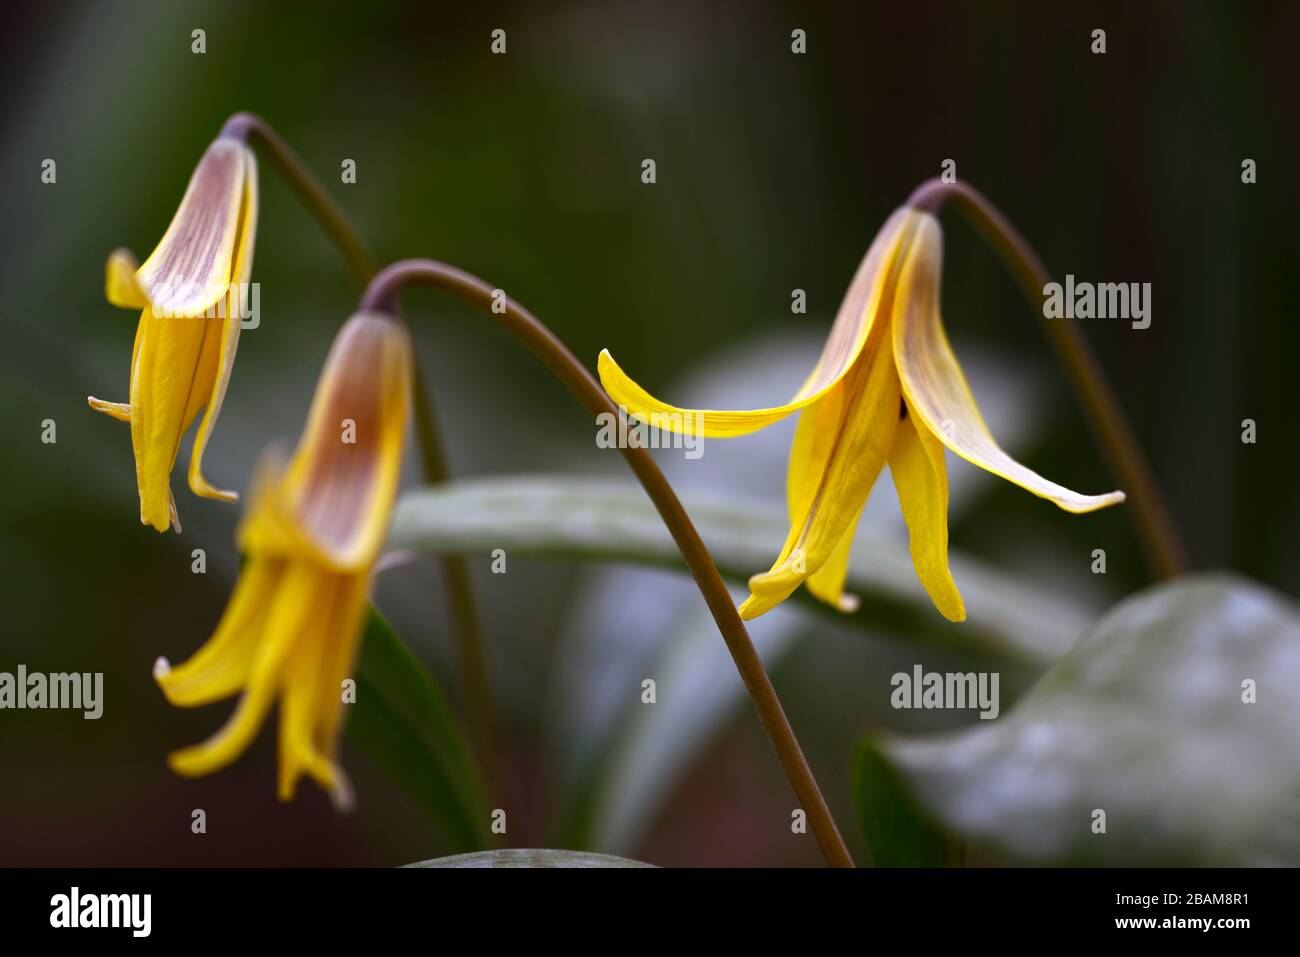 Erythronium umbilicatum,dimpled trout lily,spring,flowers,flower,flowering,yellow flowers,spring,flowers,flower,flowering,mottled foliage,RM Floral Stock Photo